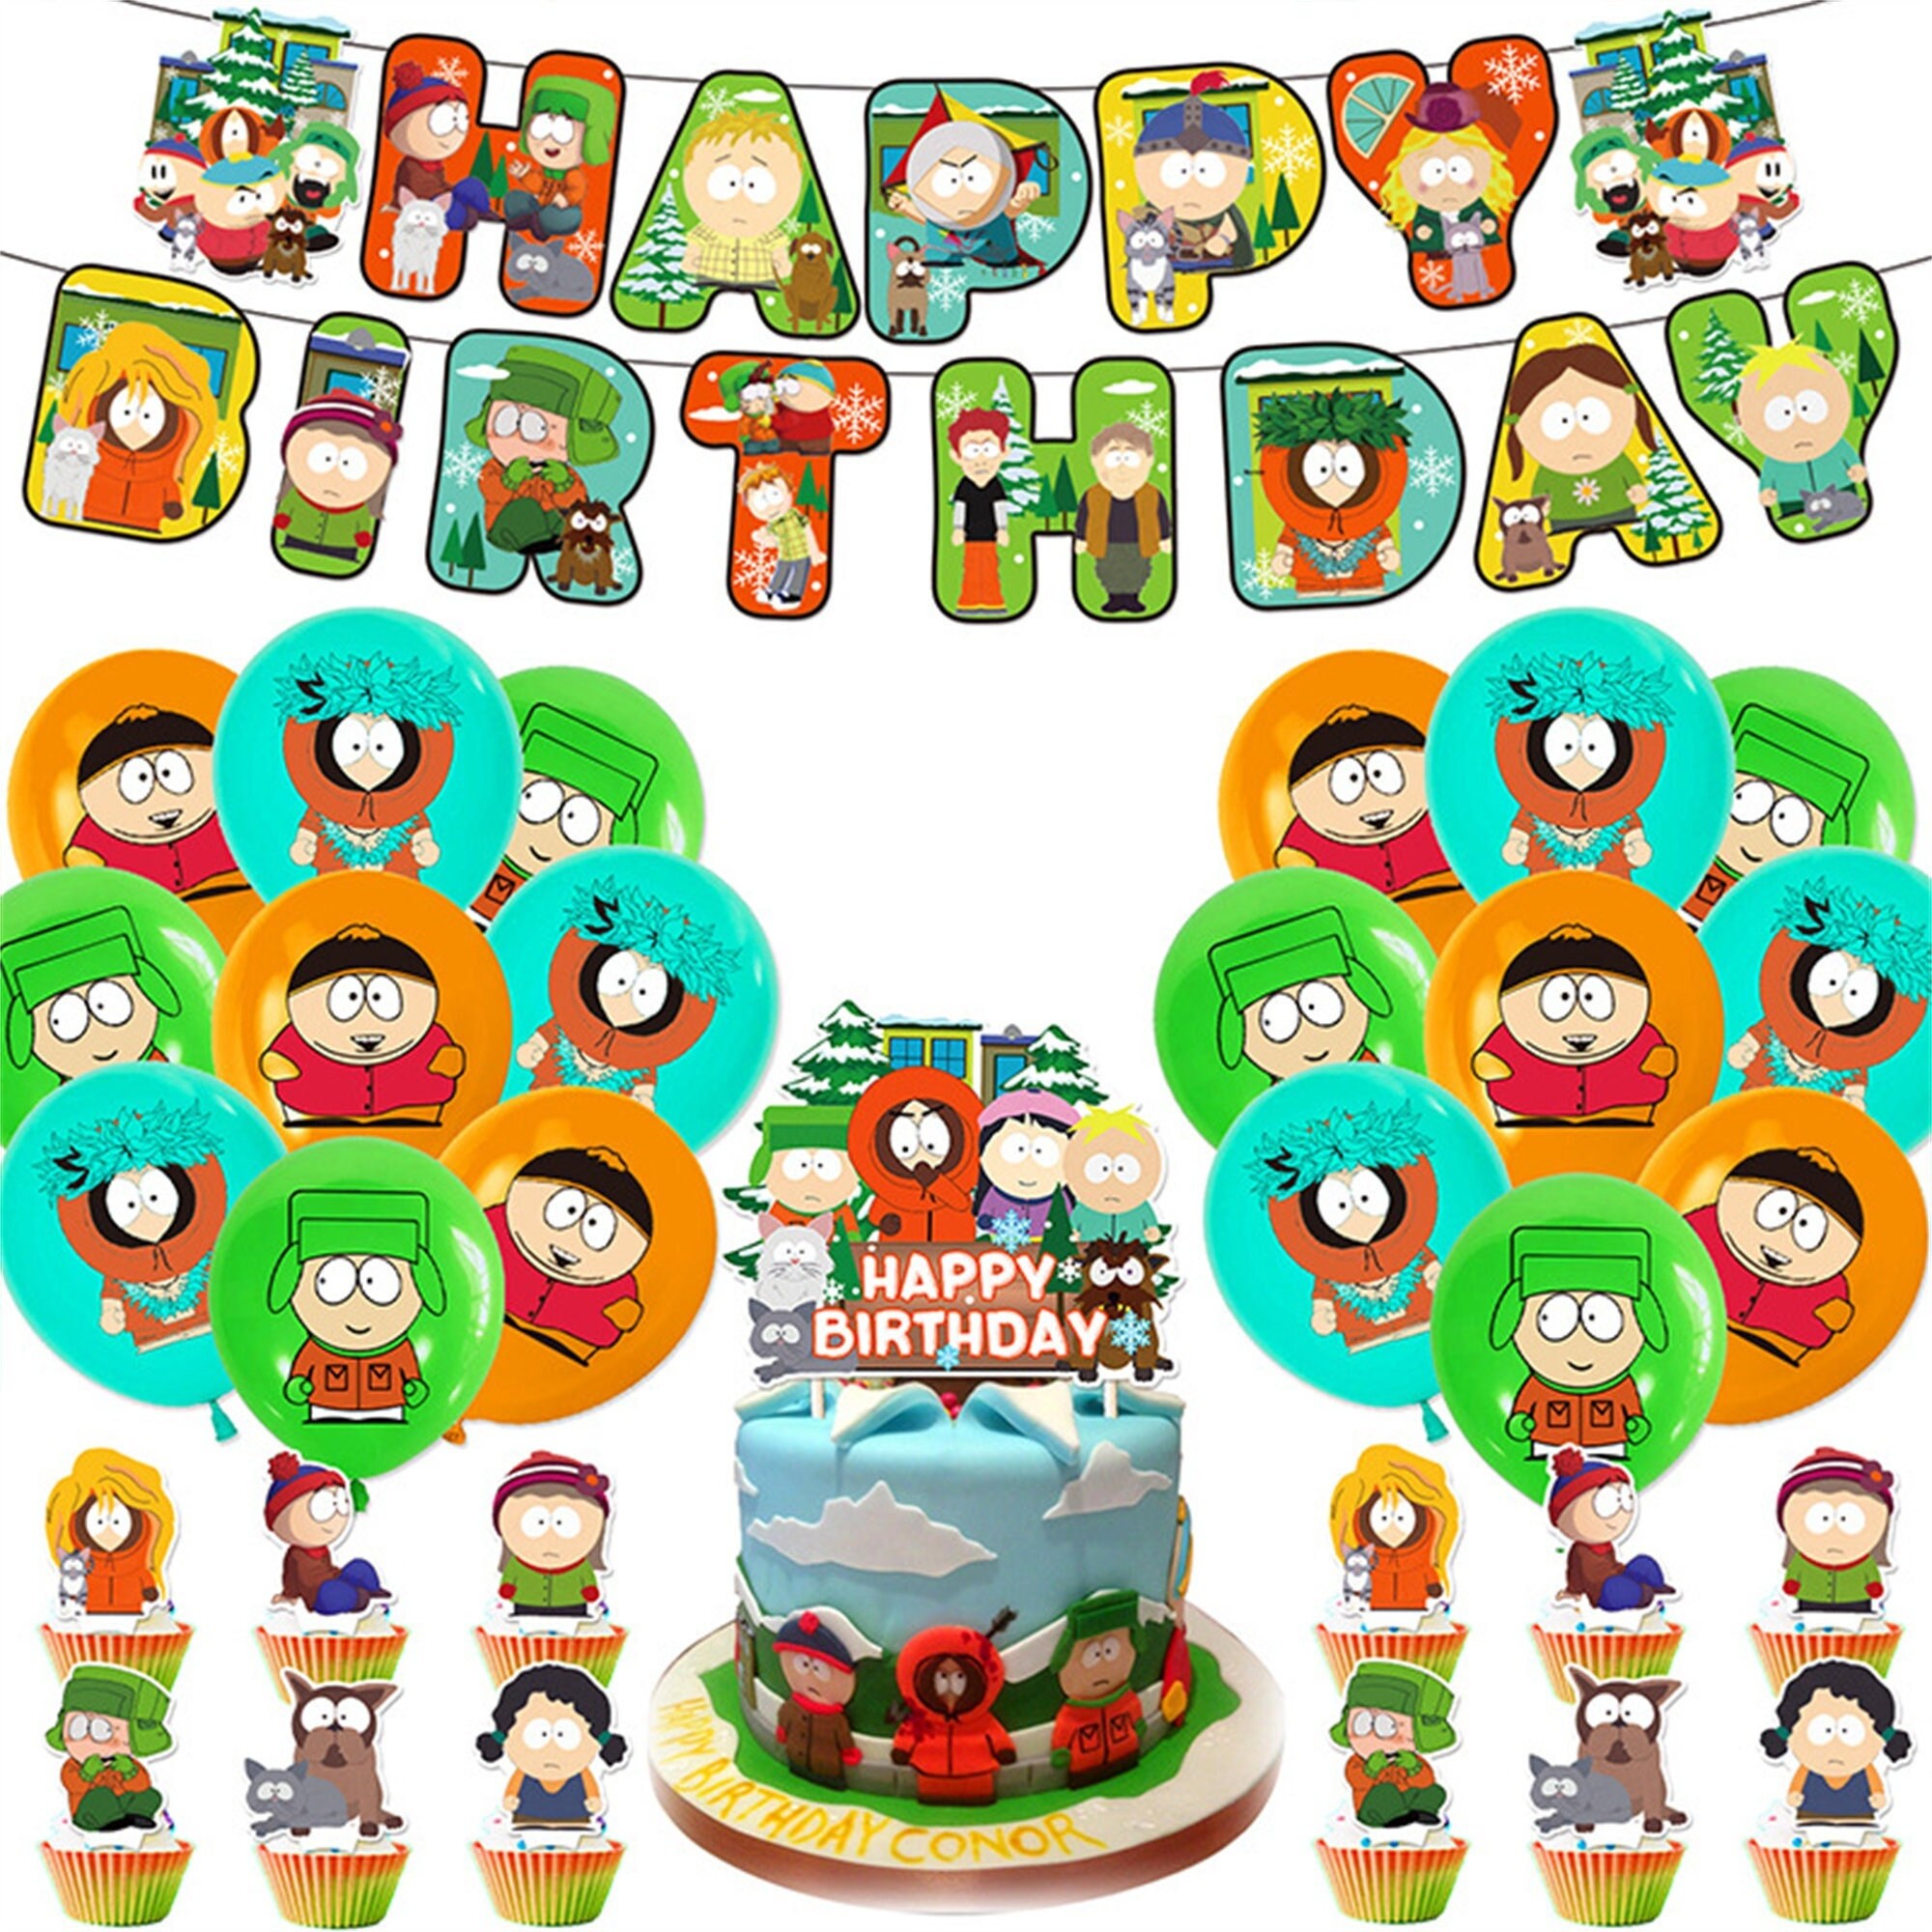  South Park Birthday Cake Topper Featuring South Park Characters  and Other Themed Decorative Pieces : Grocery & Gourmet Food